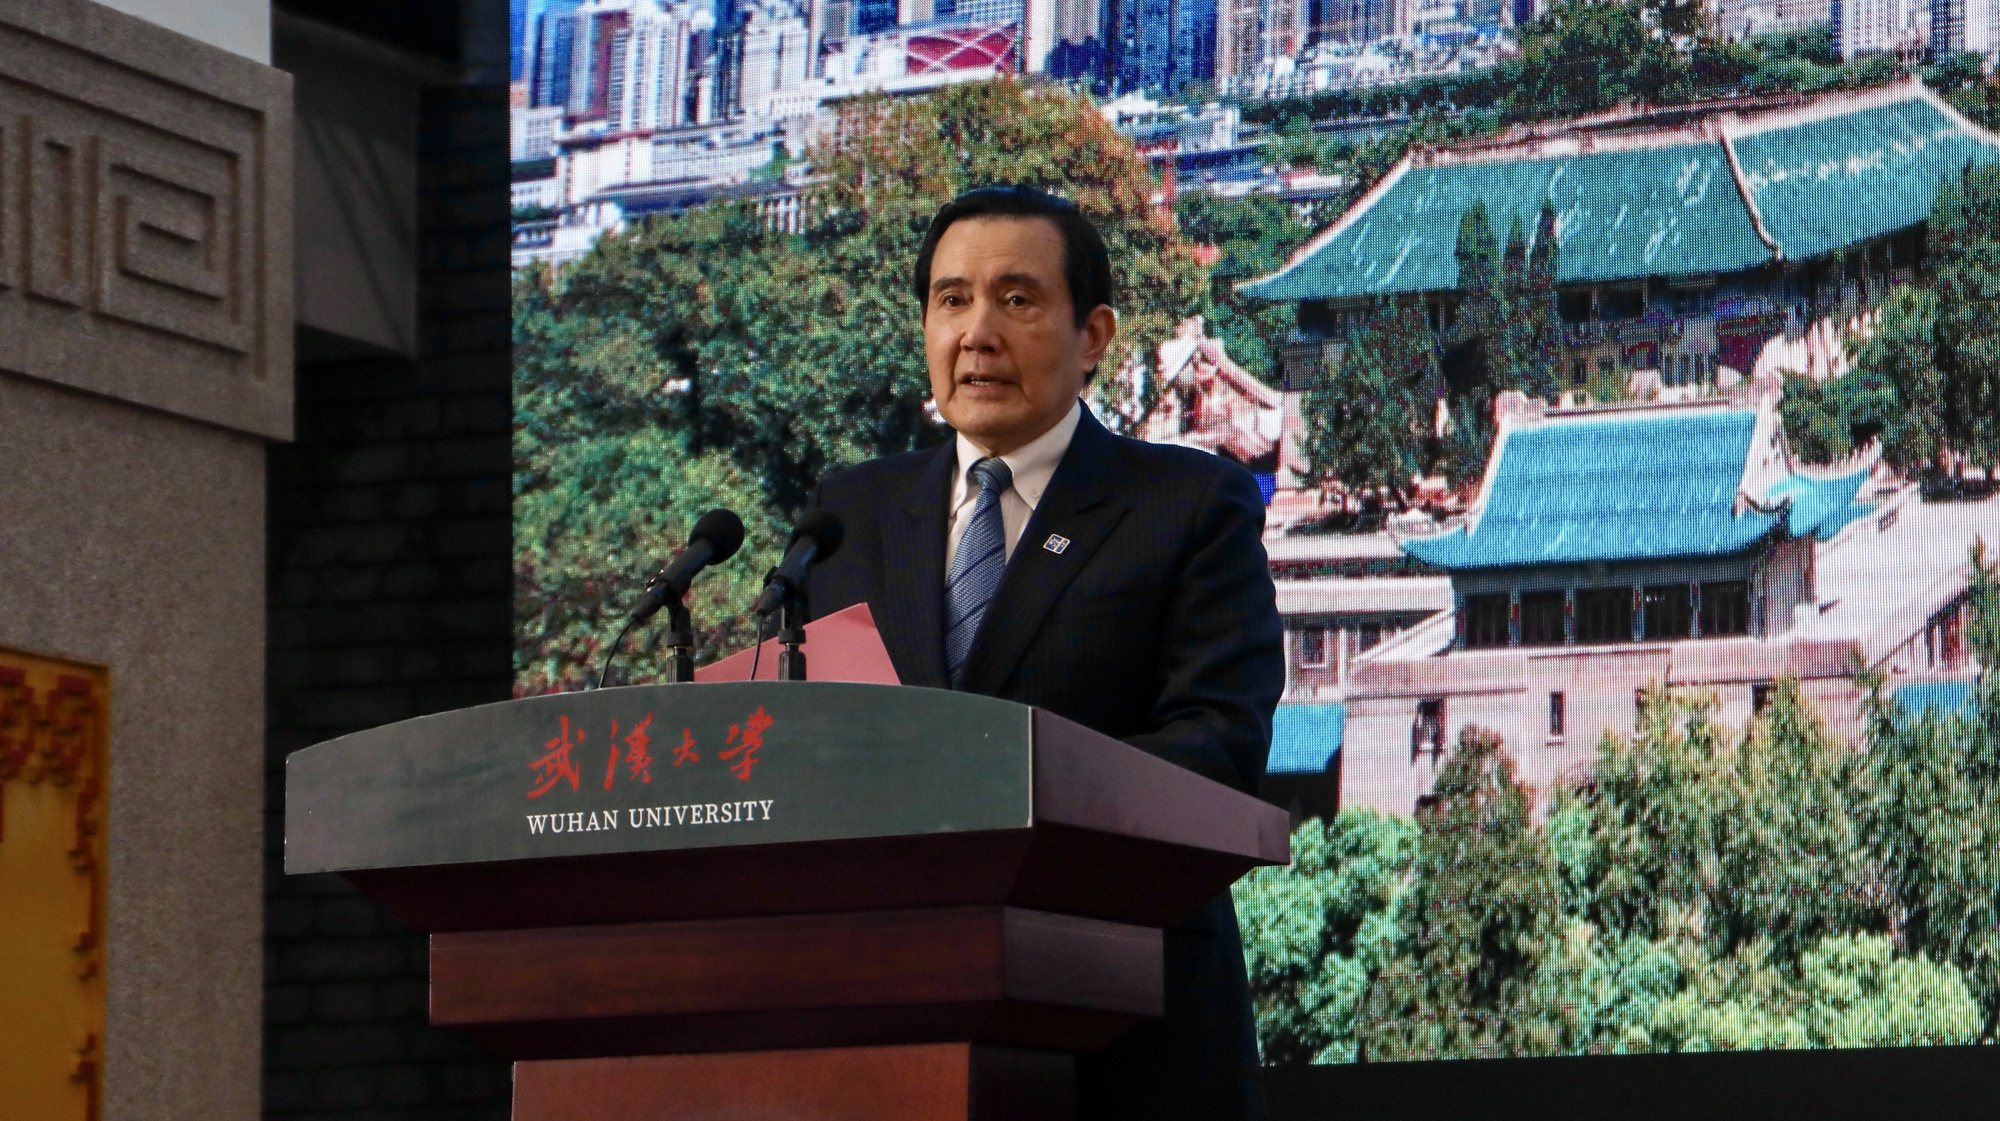 epa10550311 A handout photo made available by Ma Yung-jeou&#039;s office shows Taiwan former president Ma Ying-jeou giving a speech at the university during his visit in Wuhan, China, 30 March 2023. The first cross-strait visit by a current or former leader of the island in more than seven decades was made on Monday when Ma Ying-jeou, the former president of Taiwan, arrived in China. Taipei&#039;s ruling party deemed the trip &quot;regrettable.&quot; According to his office, Ma will not attend any official events during his 12-day trip in order to devote his time to honoring his ancestors and fostering youth exchanges.  EPA/MA YING-JEOU OFFICE HANDOUT HANDOUT MANDATORY CREDIT HANDOUT EDITORIAL USE ONLY/NO SALES